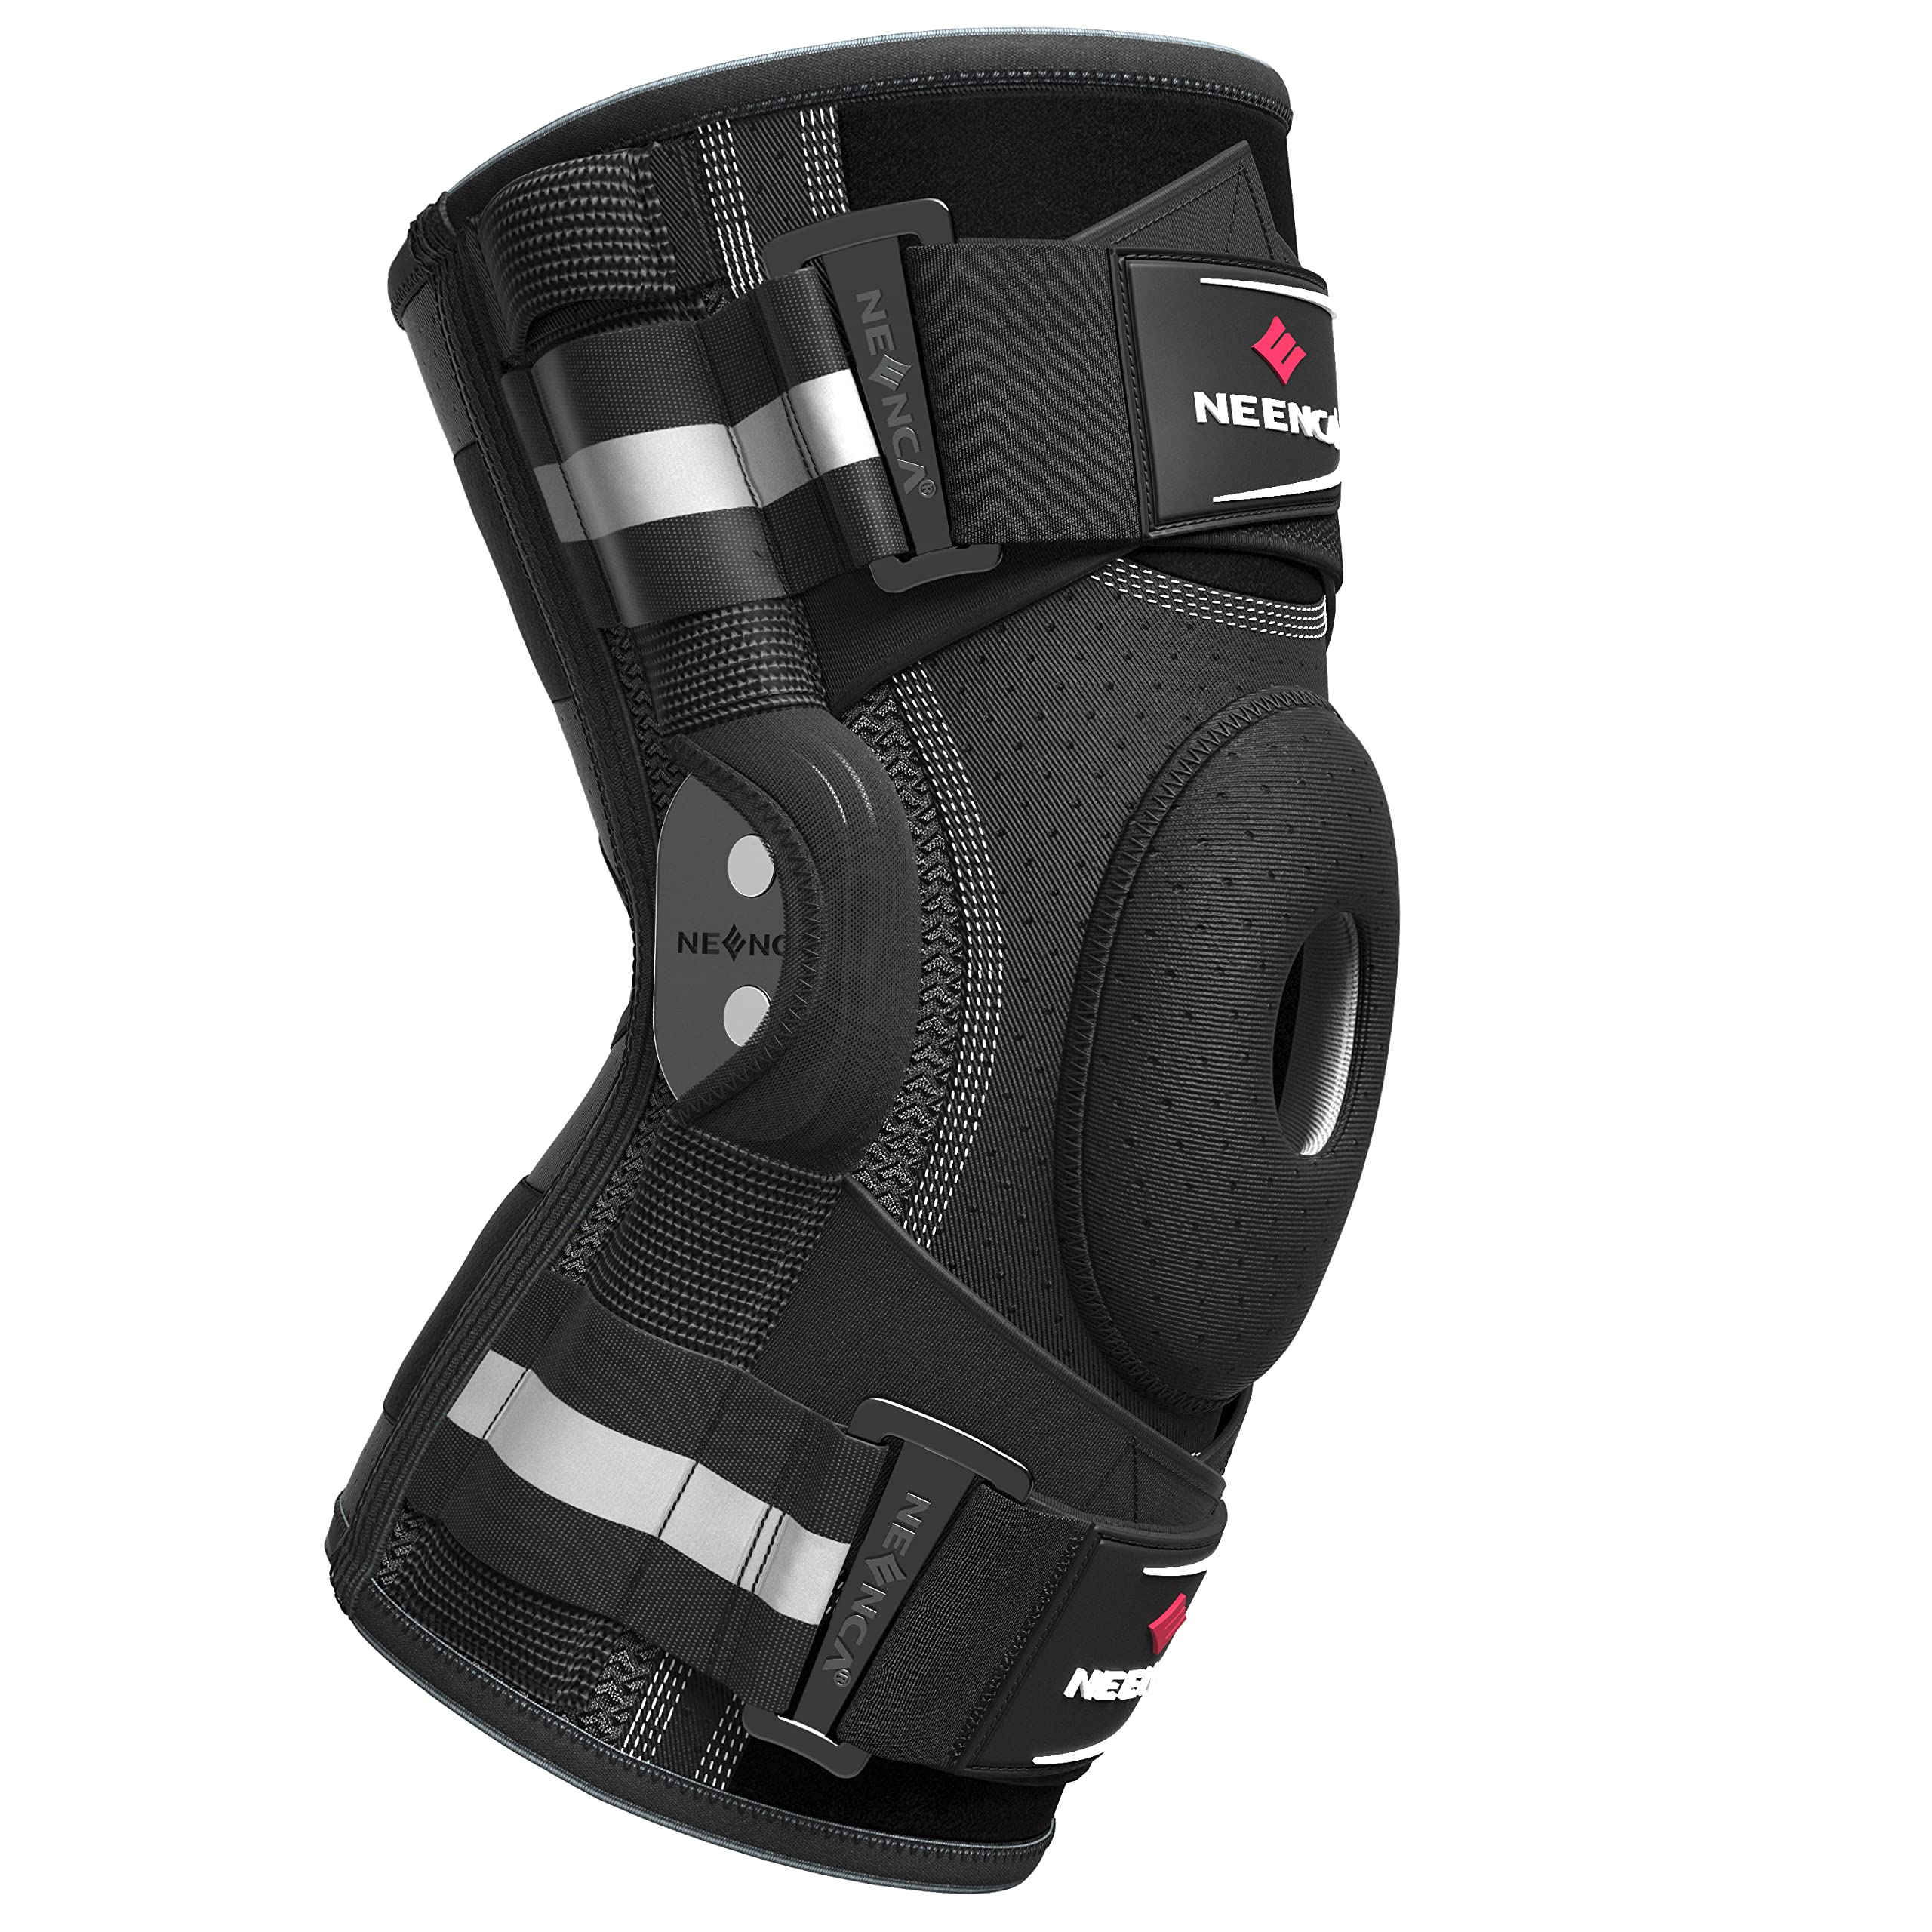 ACL Knee Braces for ACL Tear or Injury